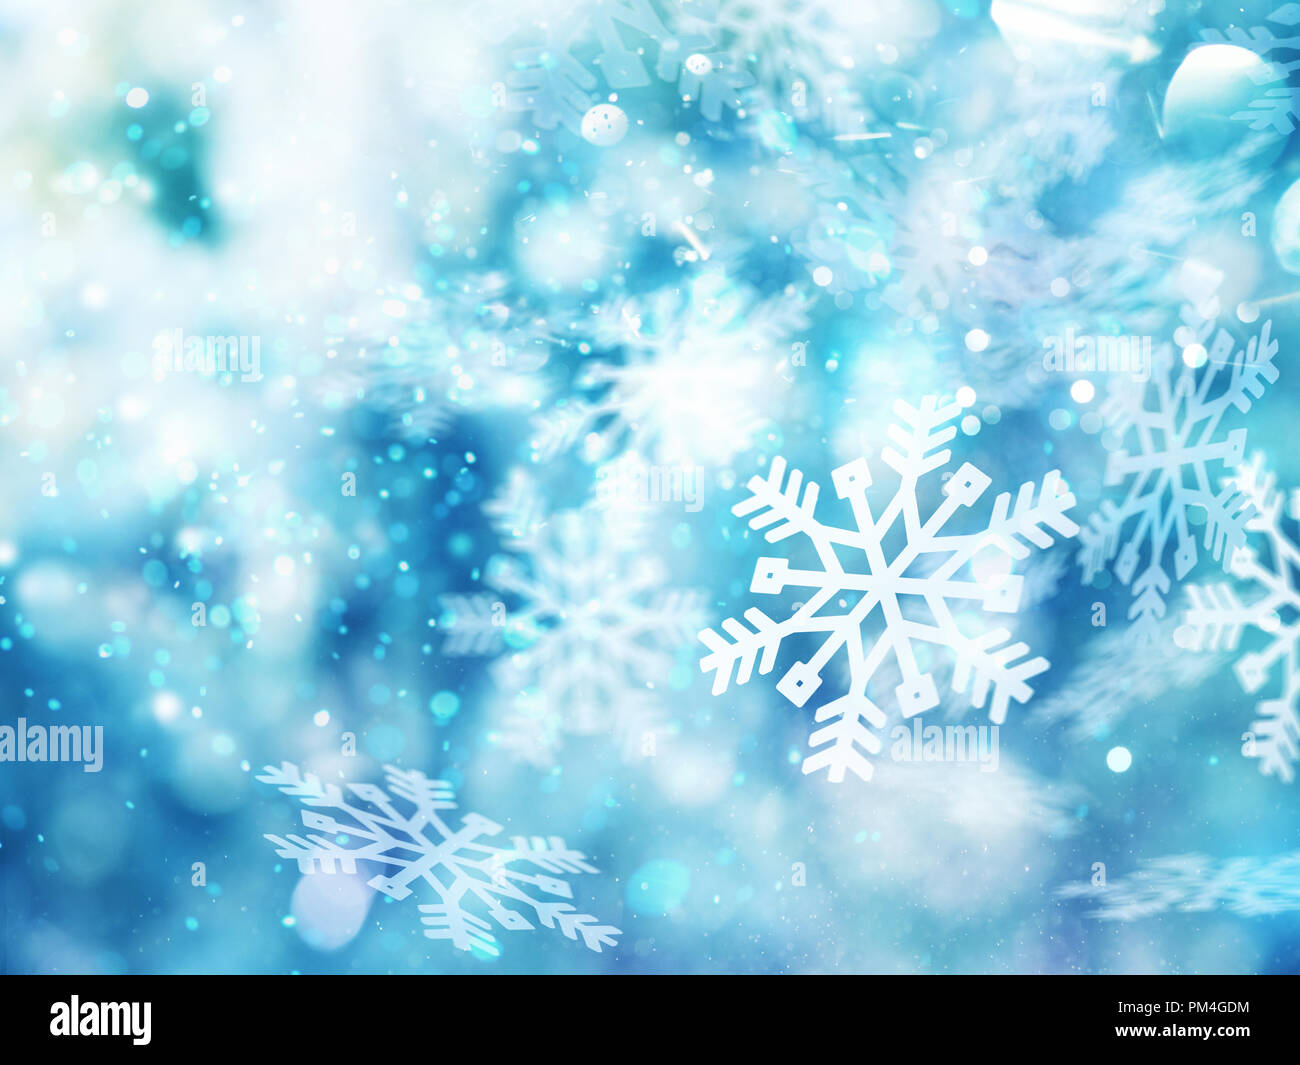 Abstract glowing Christmas blue background with snowflakes Stock Photo